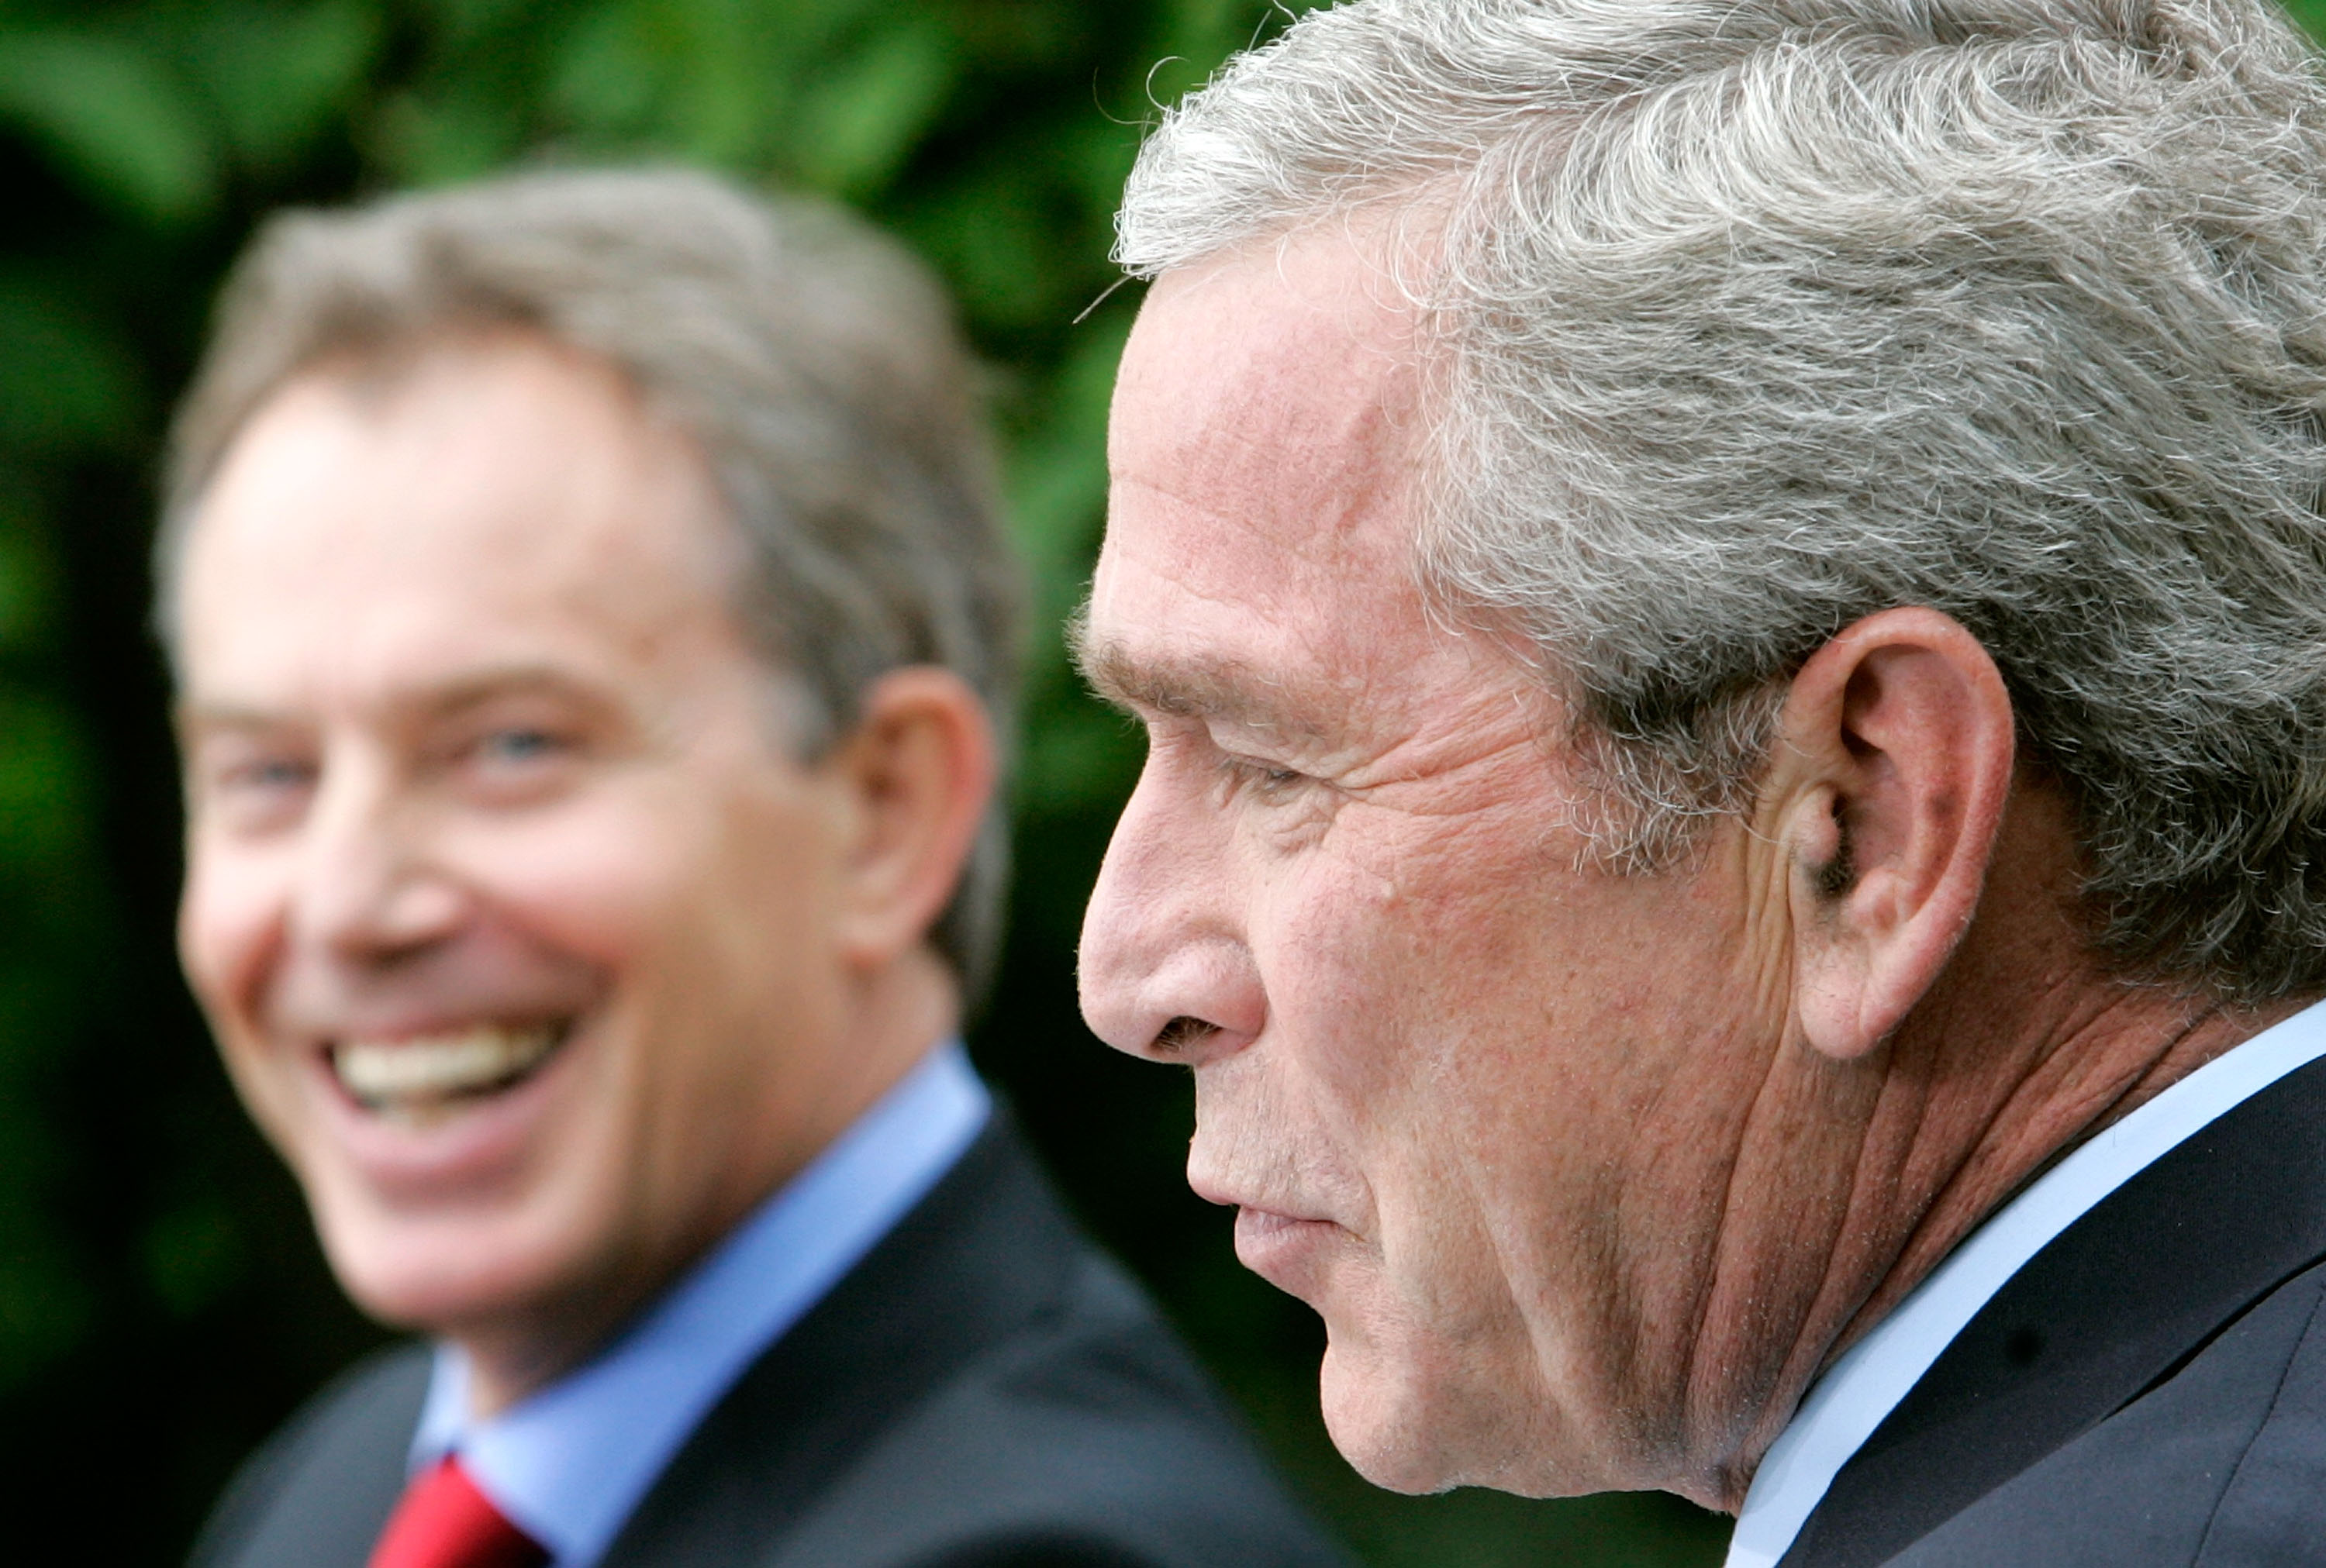  British Prime Minister Tony Blair (L) laughs as U.S. President George W. Bush speaks at a news conference in the Rose Garden of the White House May 17, 2007.  (Photo by Mark Wilson/Getty Images)